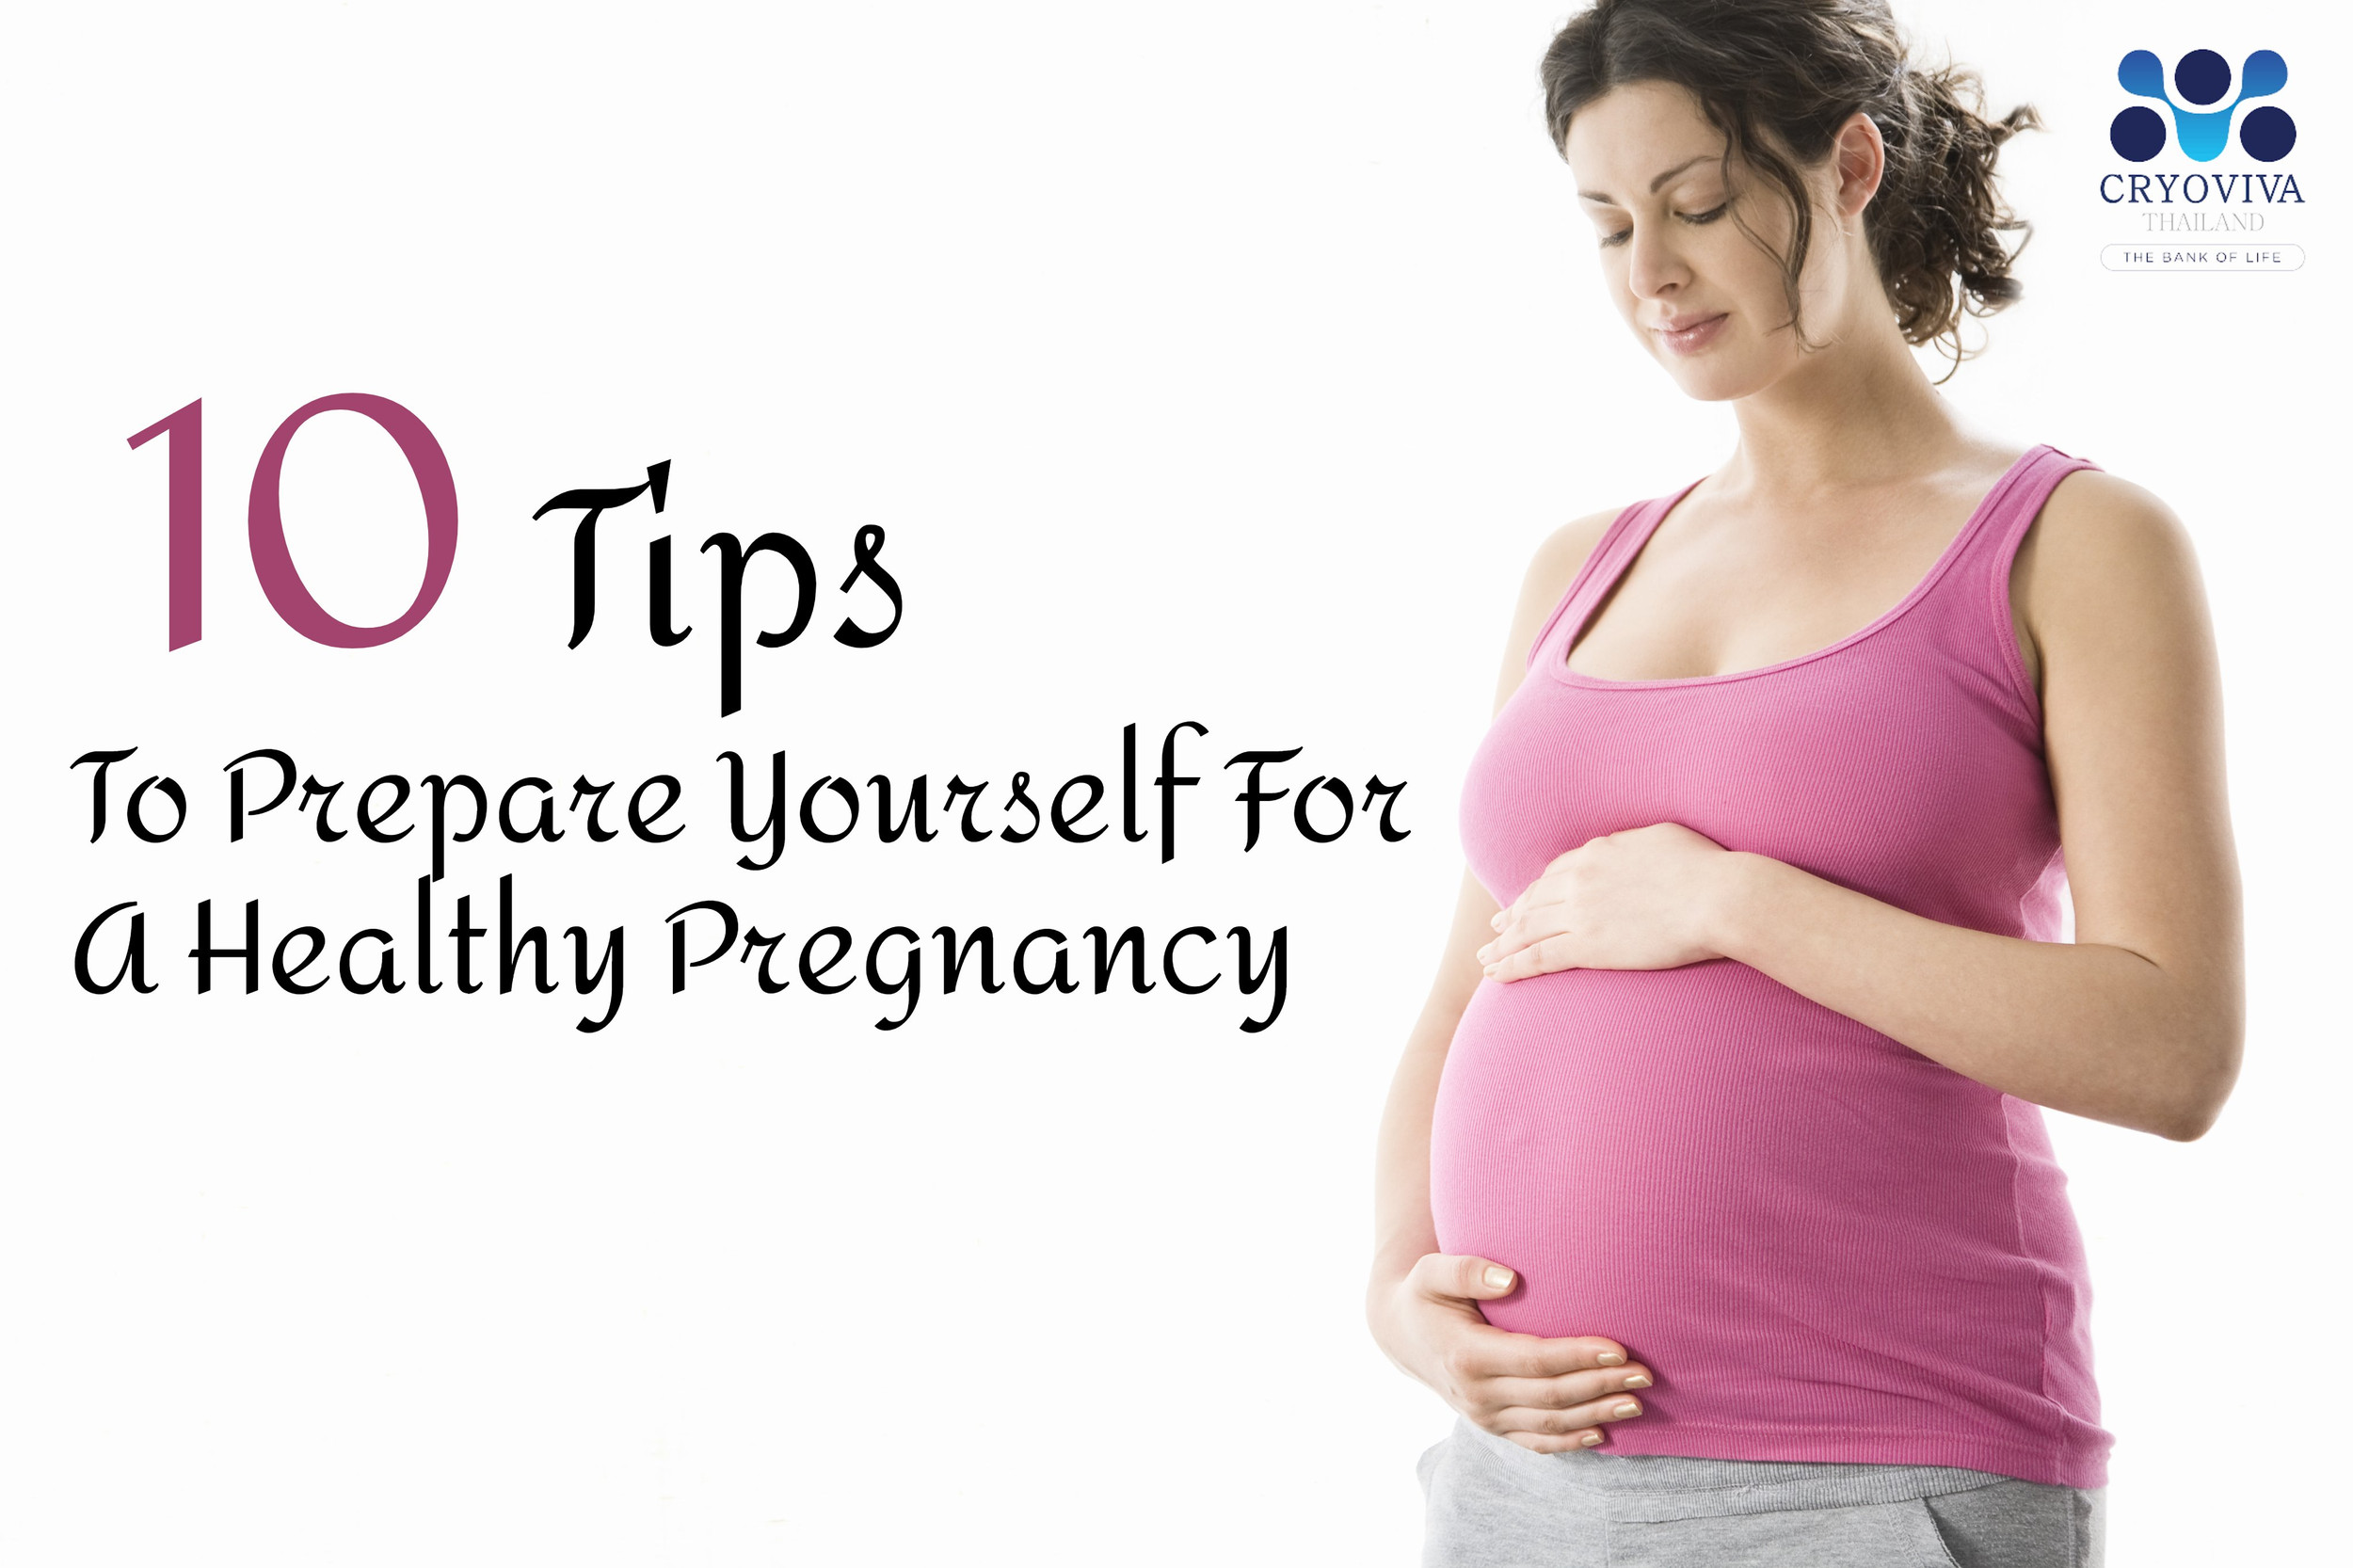 10 Tips To Prepare Yourself For A Healthy Pregnancy